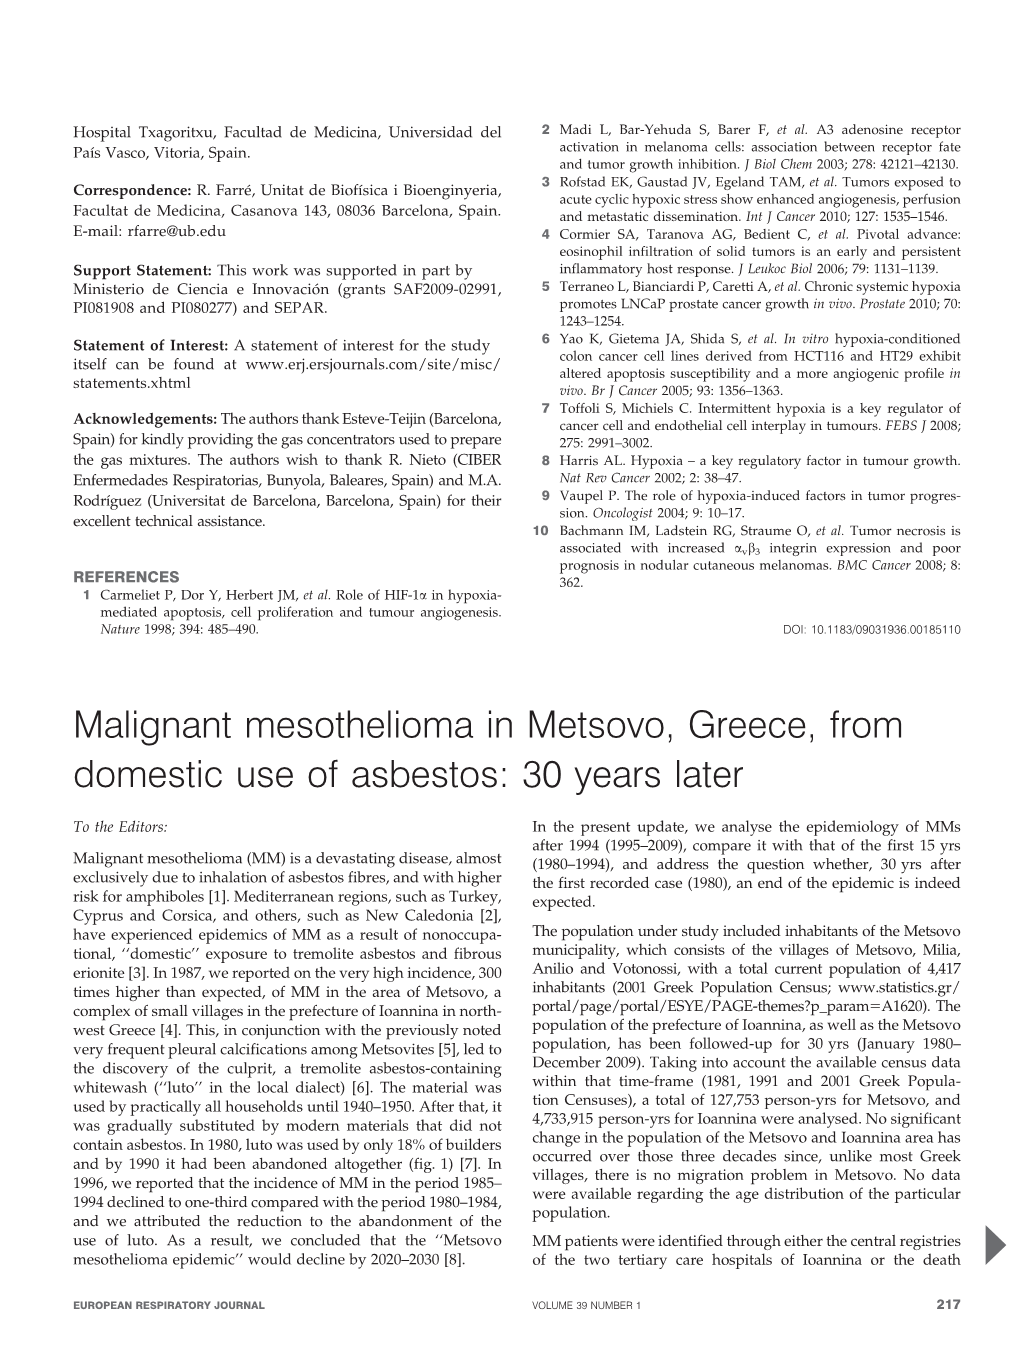 Malignant Mesothelioma in Metsovo, Greece, from Domestic Use of Asbestos: 30 Years Later